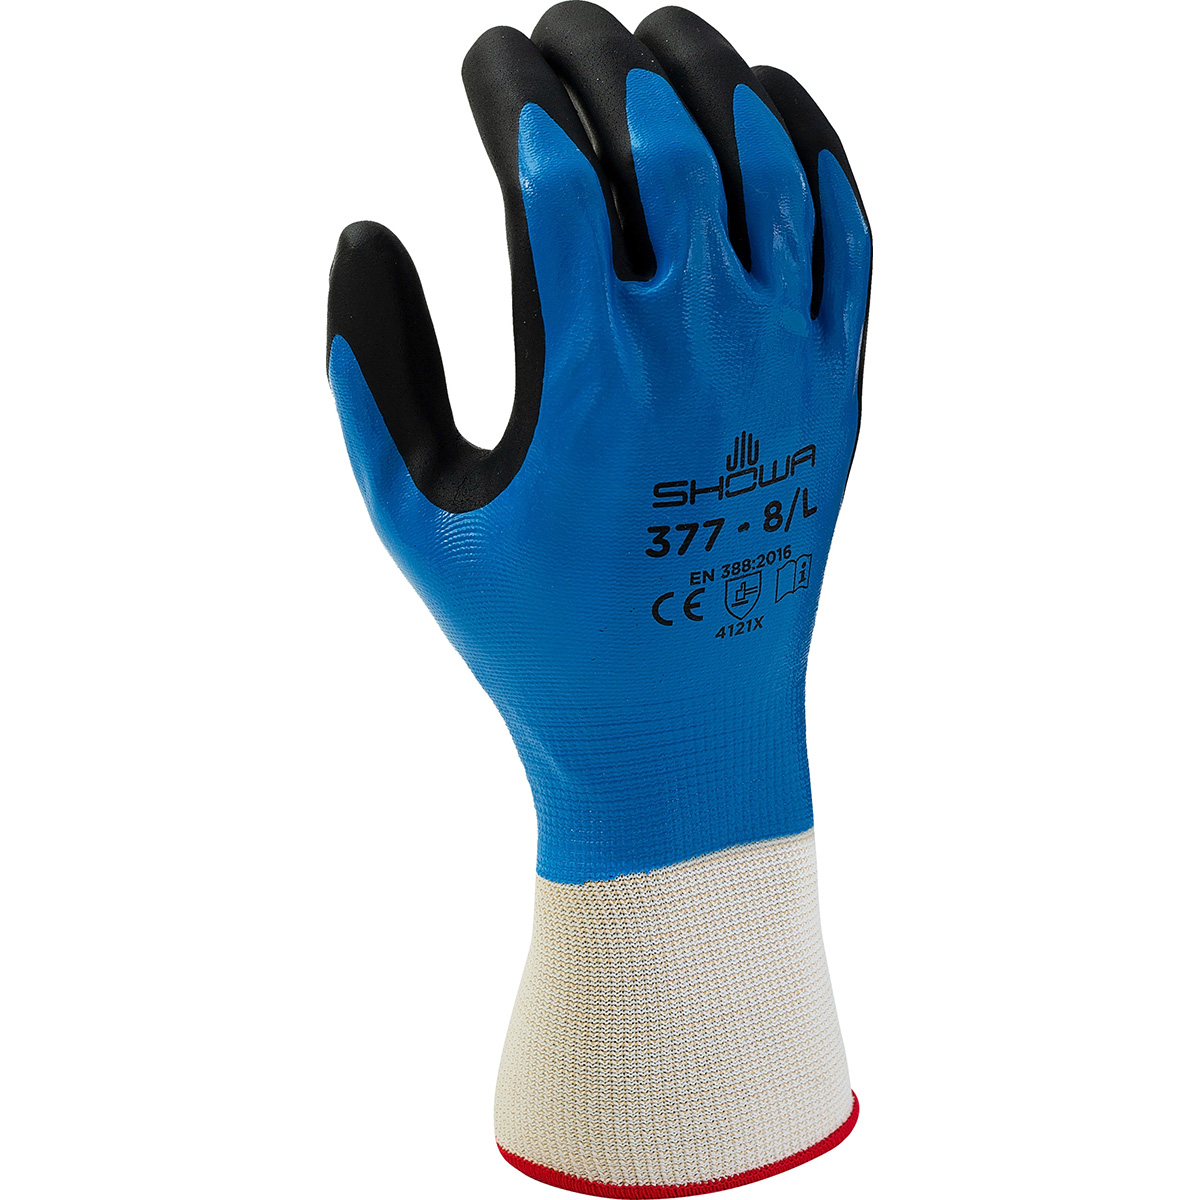 General purpose full nitrile blue undercoating w/black foamed palm coating, 13 gauge, seamless knitted liner, small